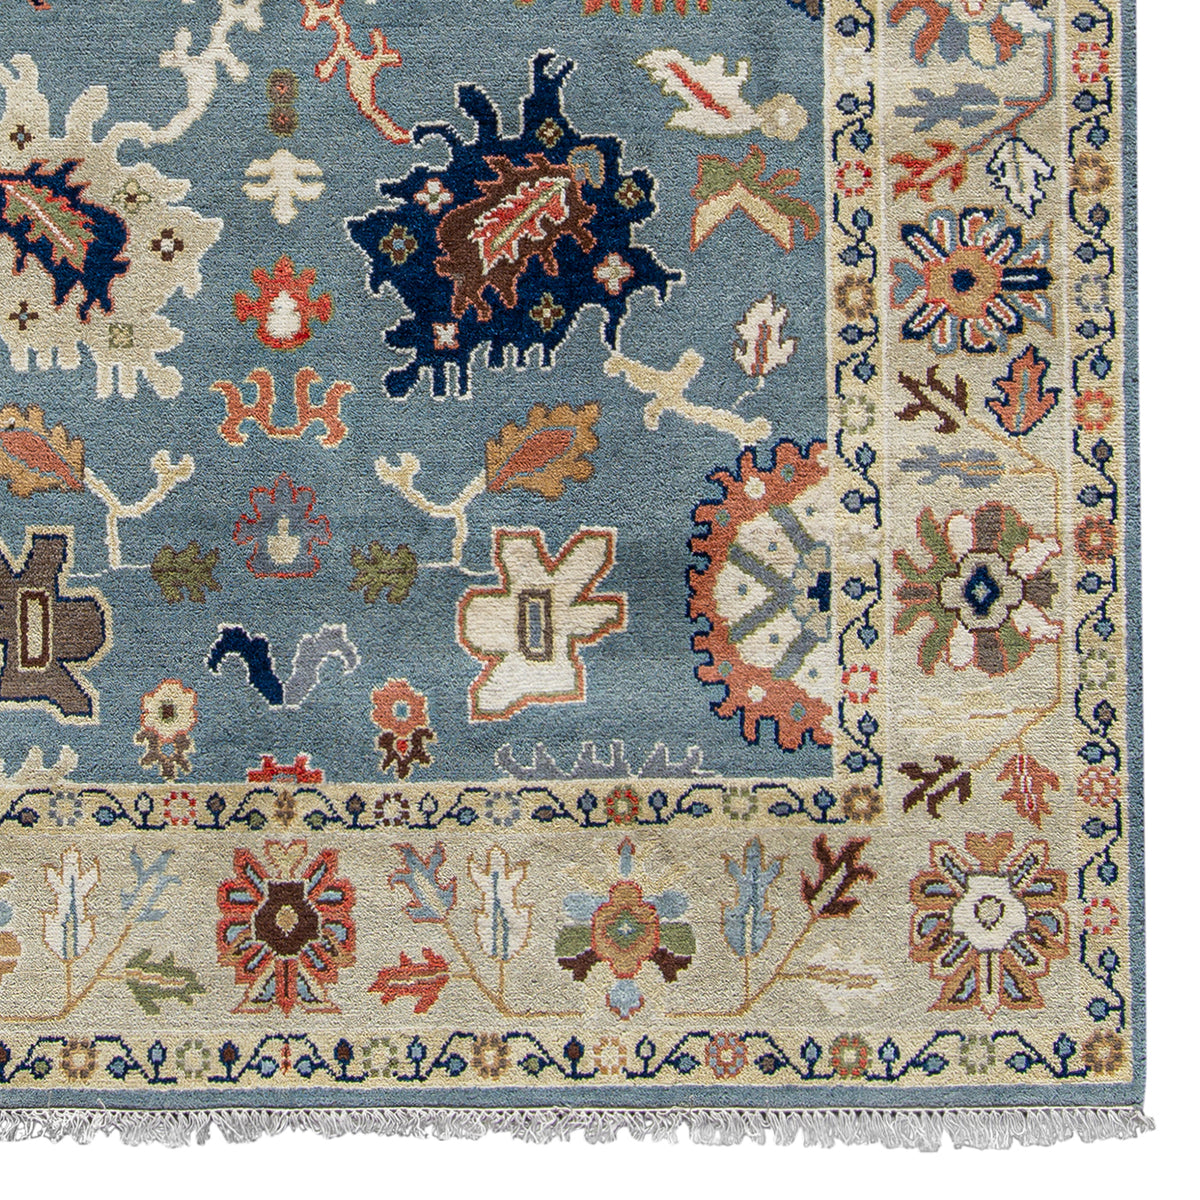 Hand-knotted Wool Oushak Modern Rug 244cm x 299cm